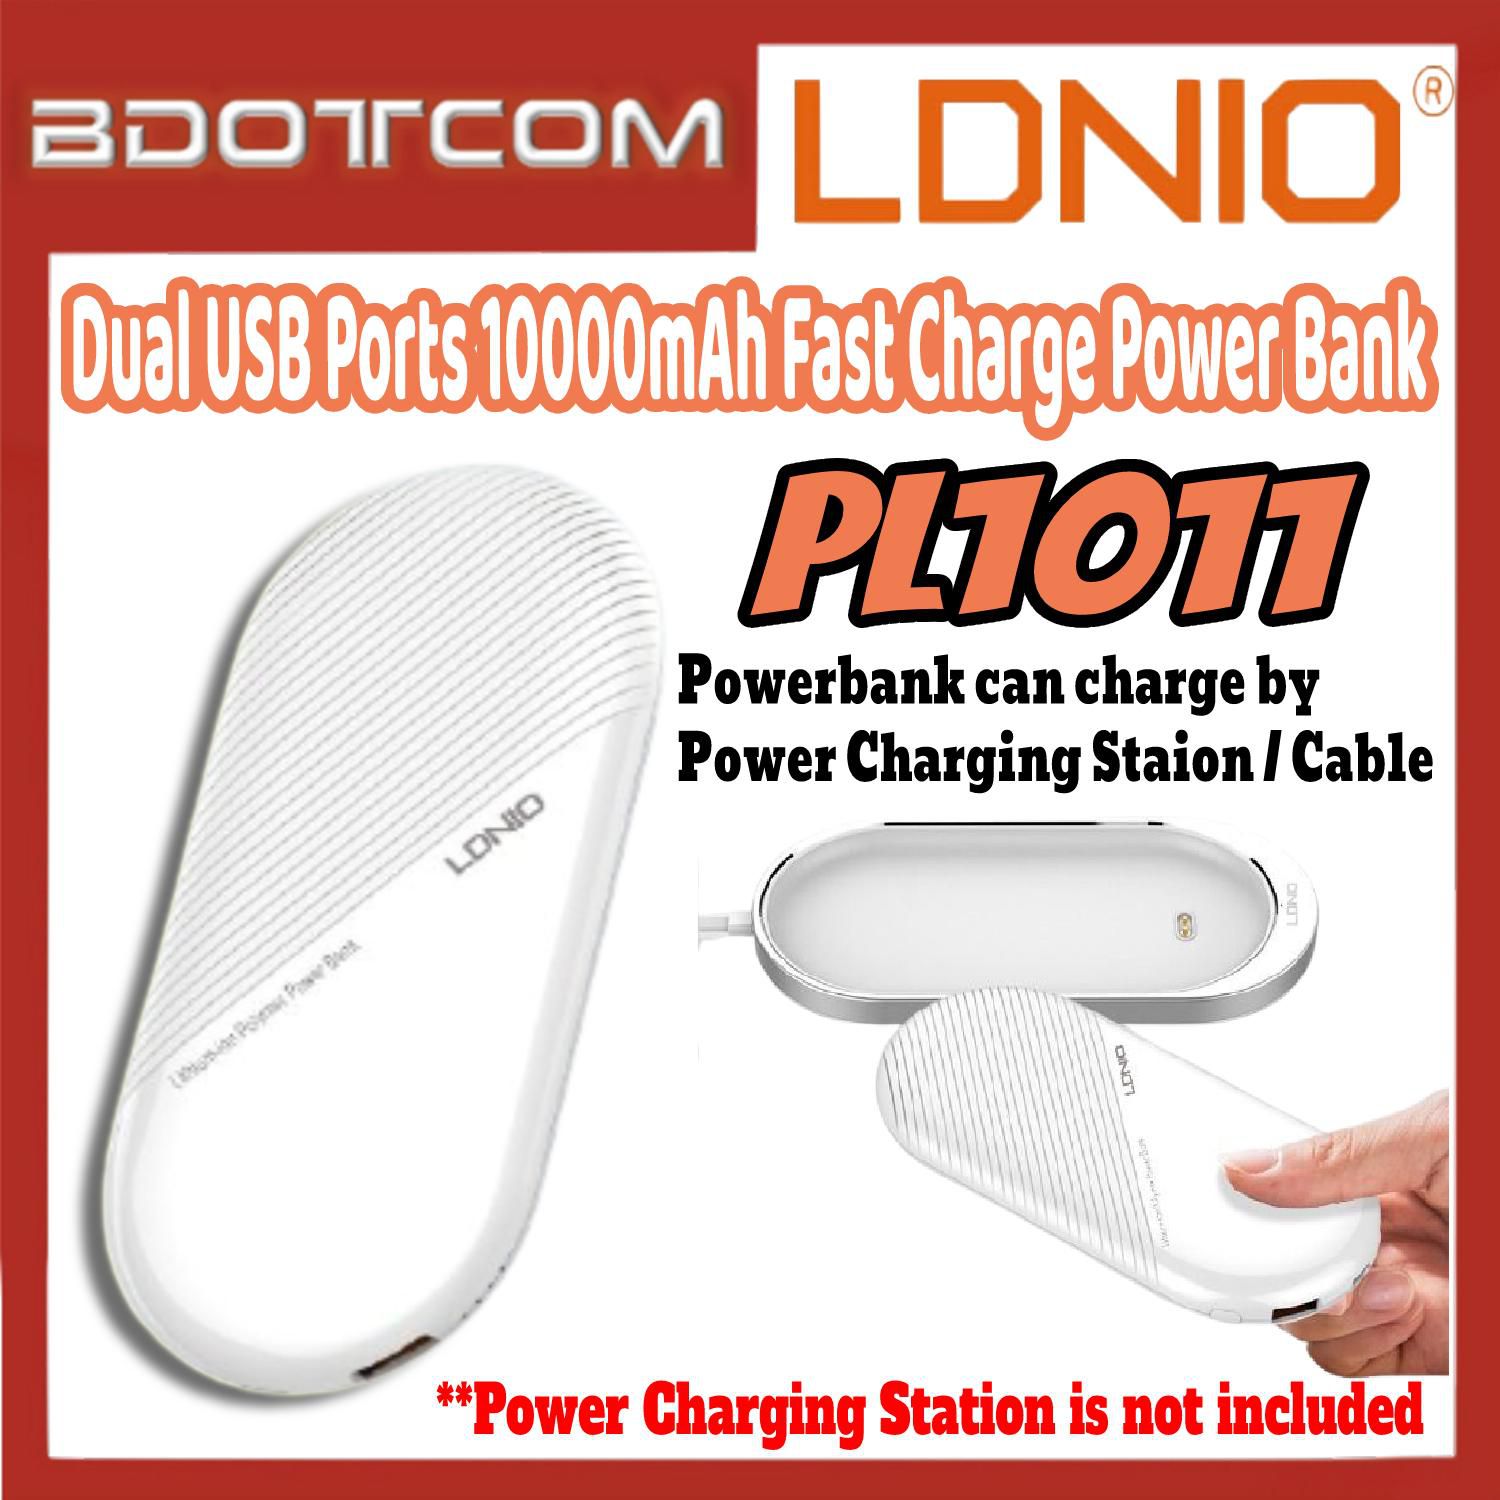 LDNIO PL1011 Dual USB Ports 10000mAh Fast ChargePower Bank for Samsung